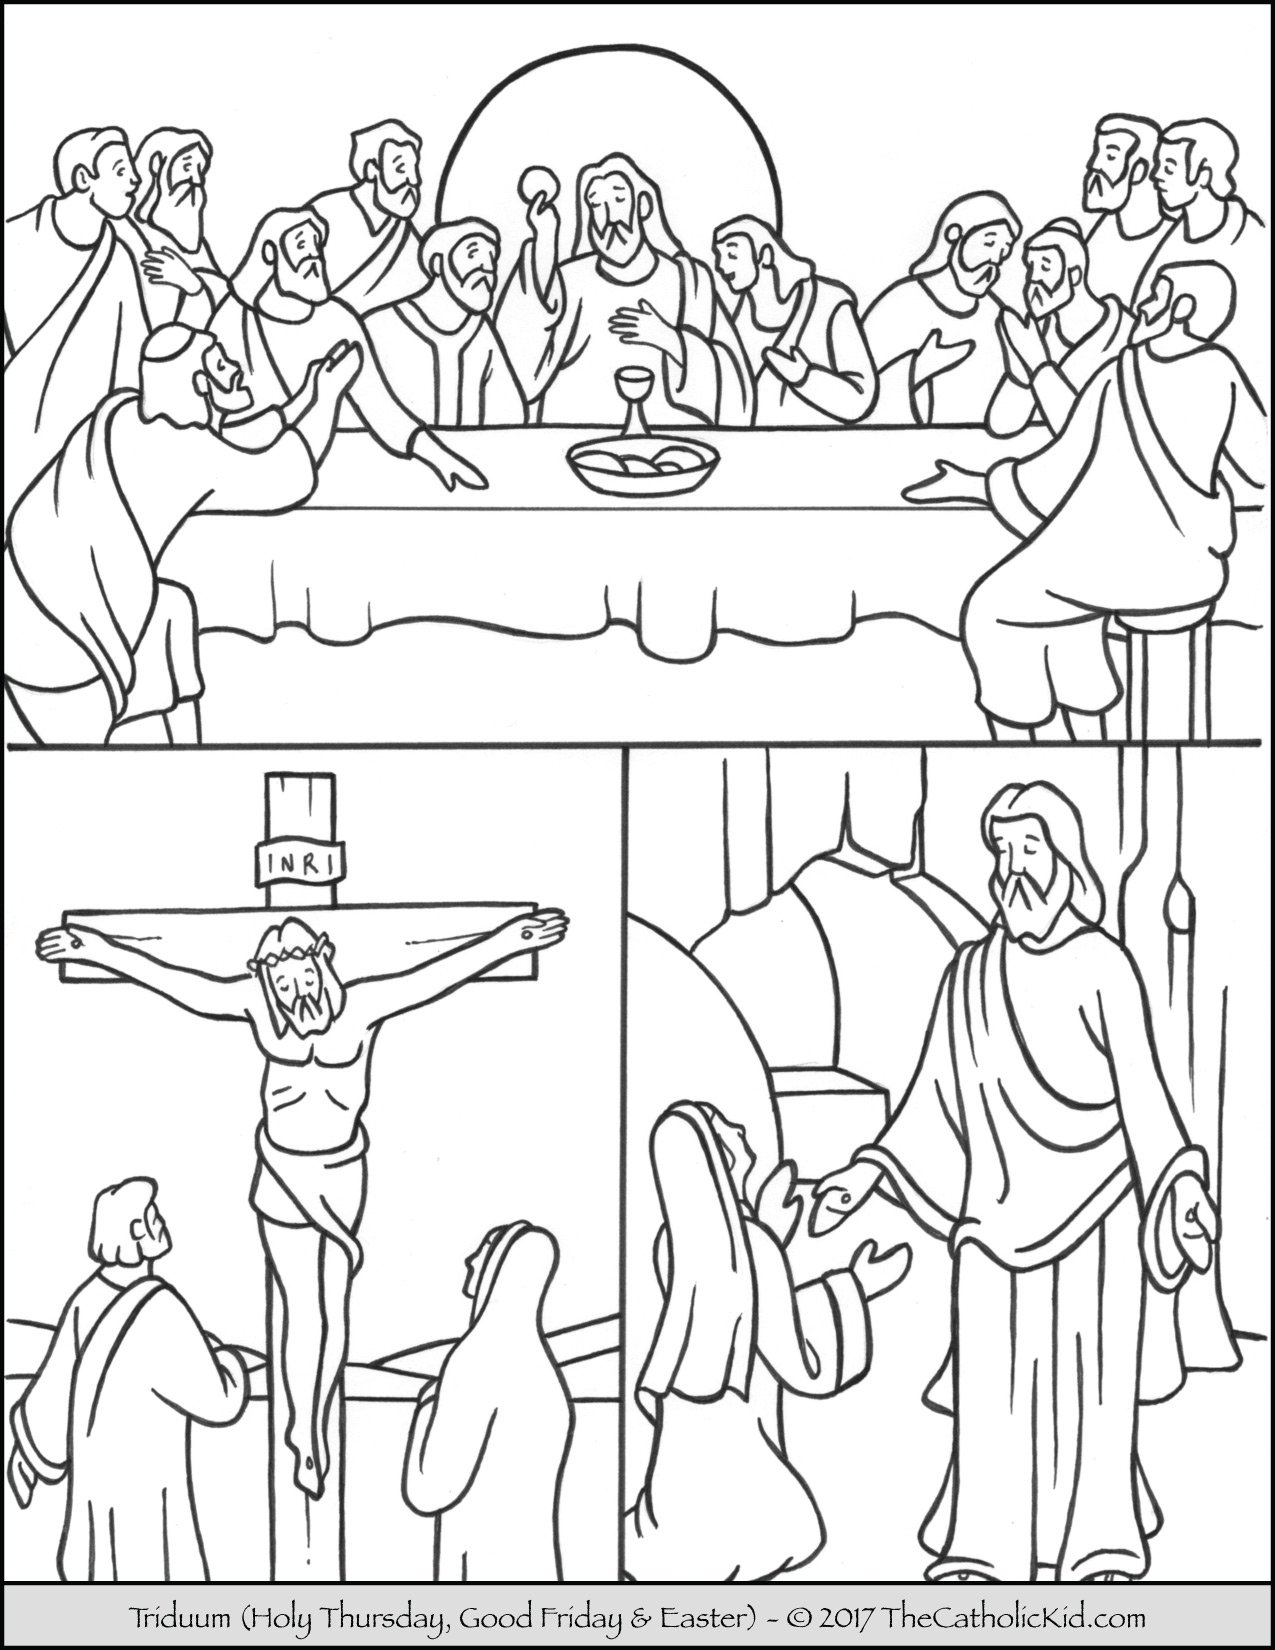 Easter triduum coloring page